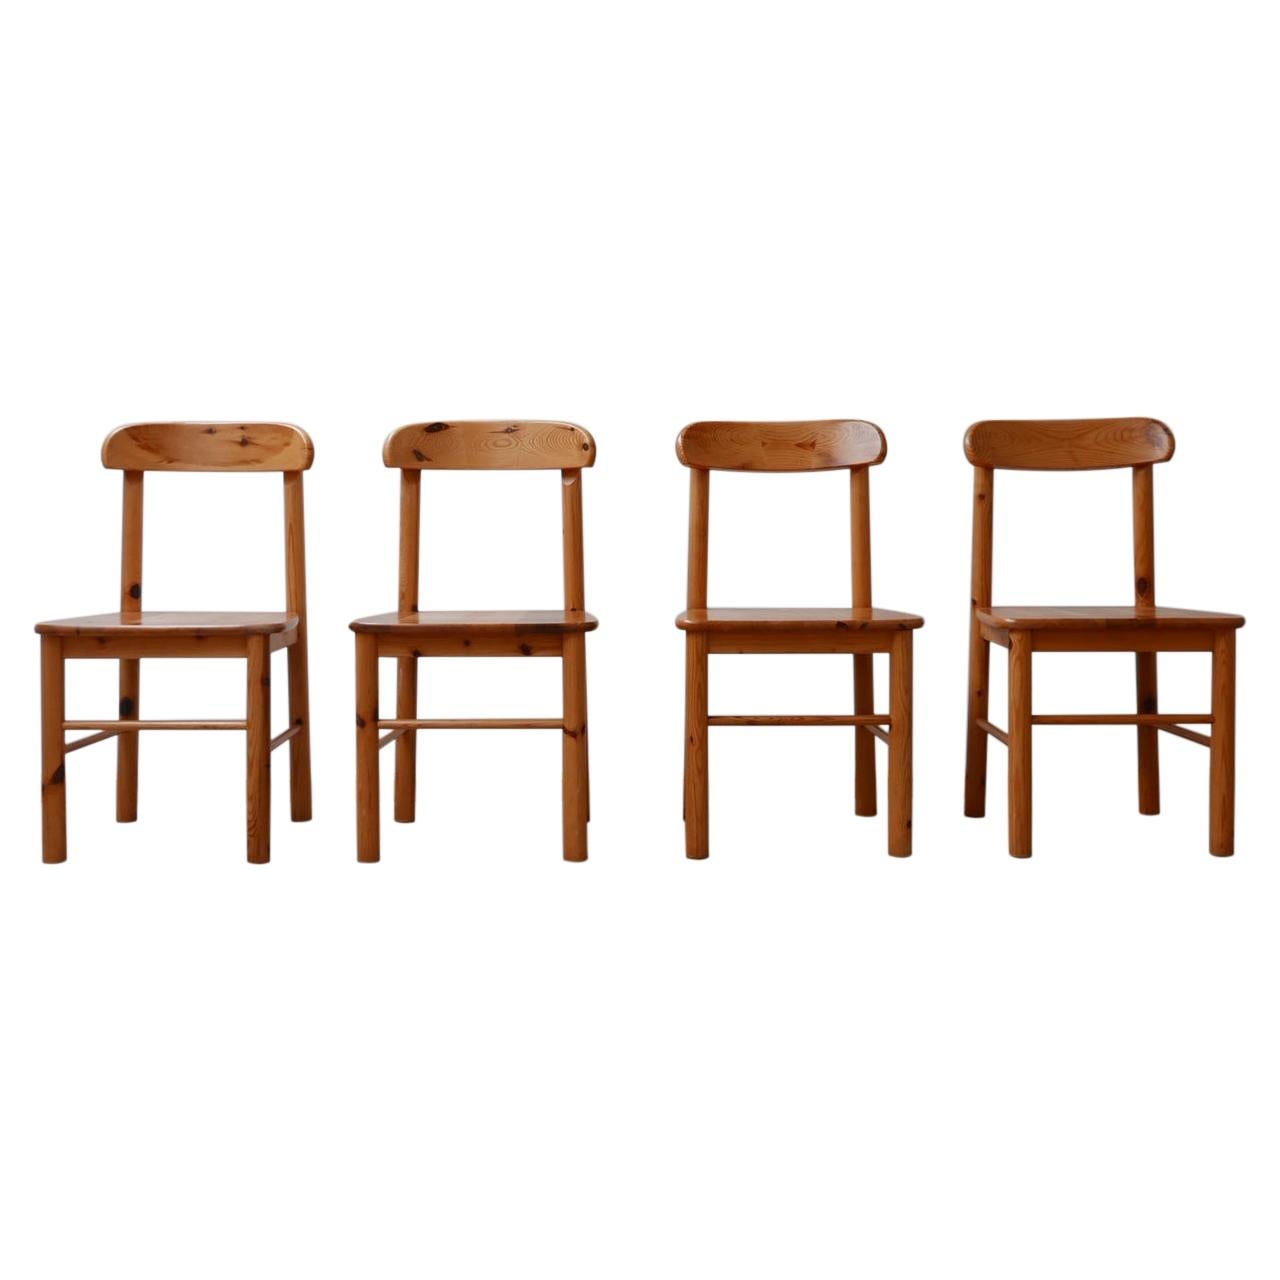 Four Midcentury Pine Dining Chairs